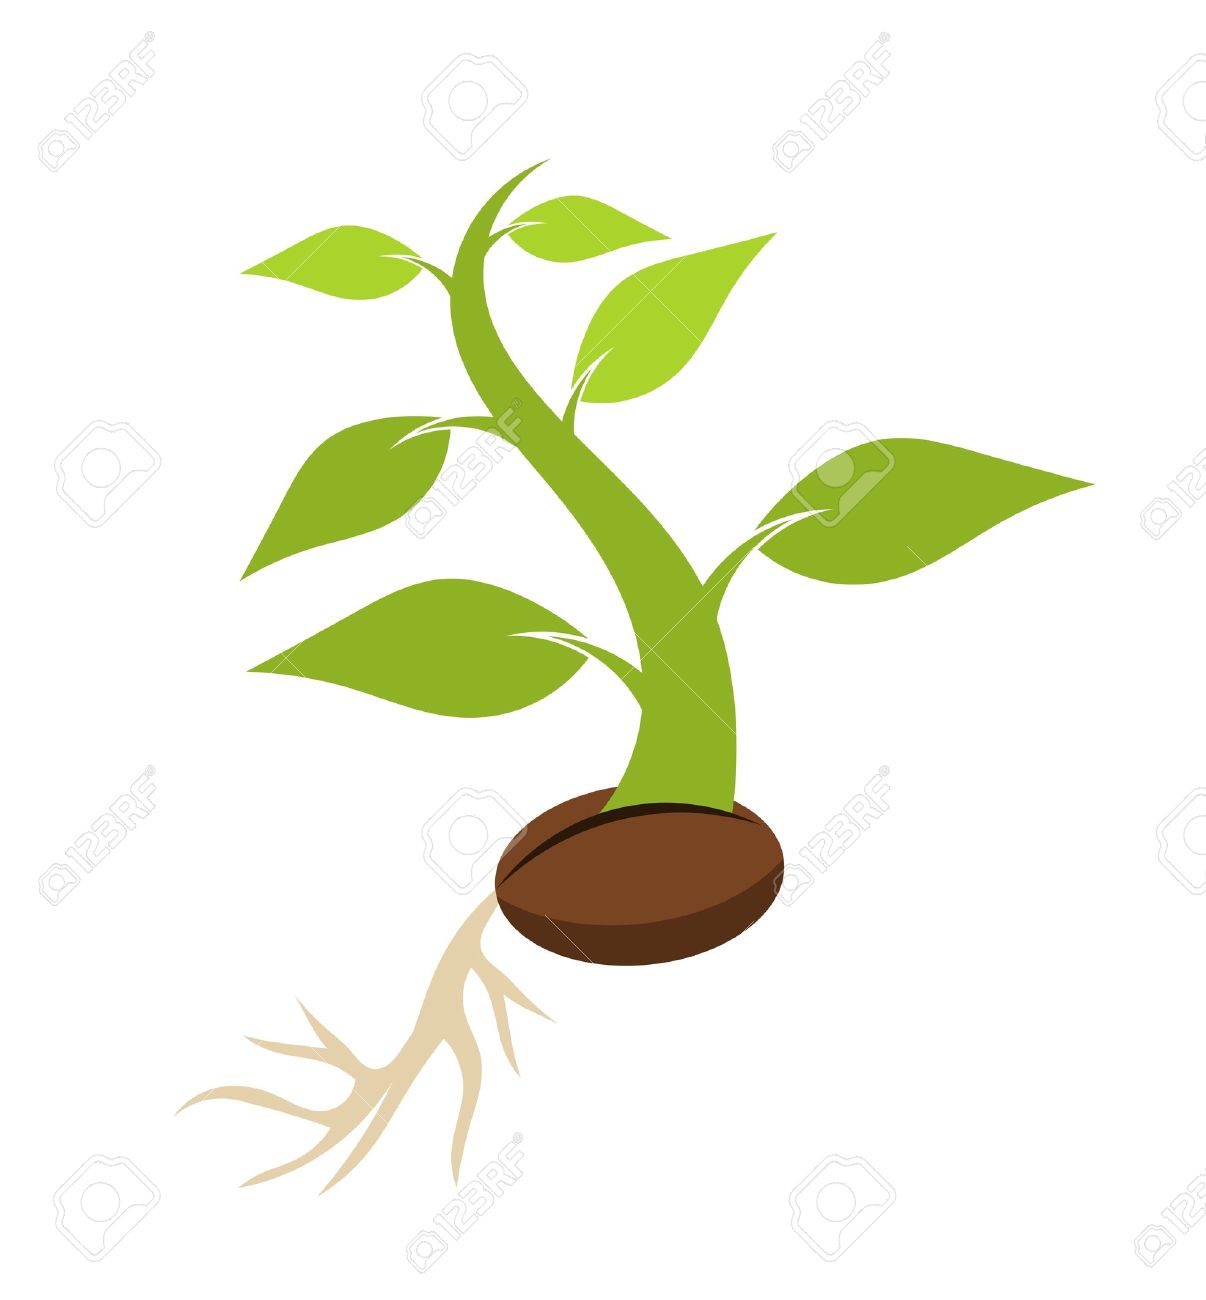 Tree seed clipart 1 » Clipart Station.